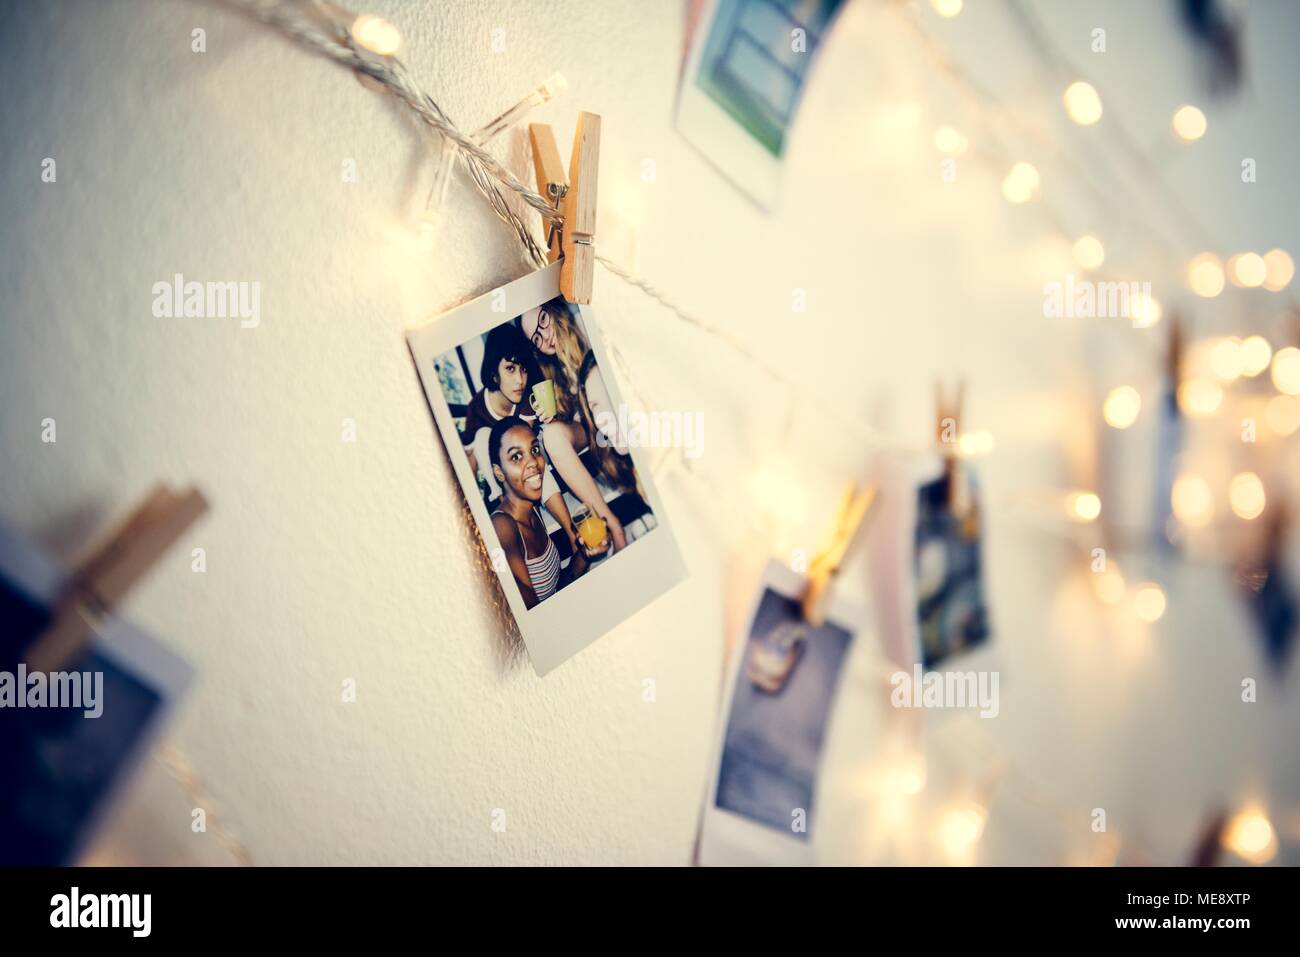 Photos hanging with decoration lights on the white wall Stock Photo